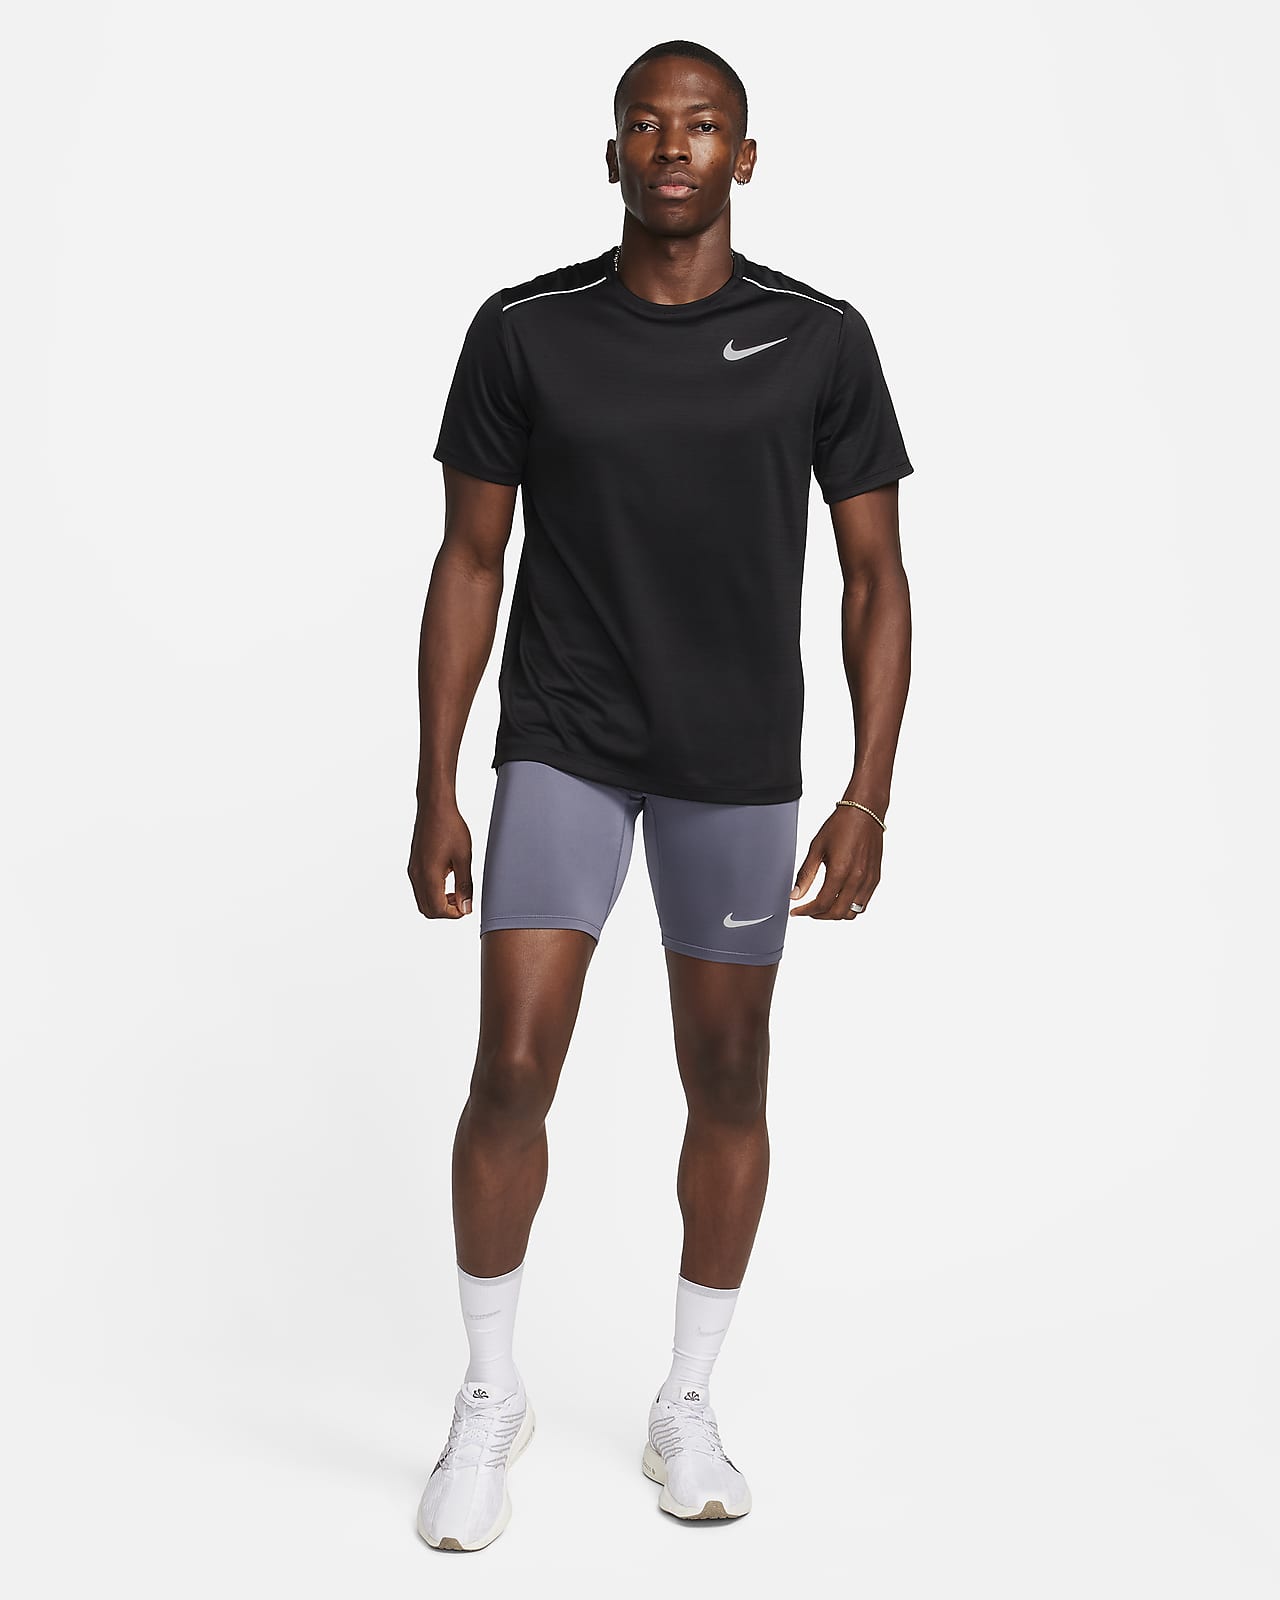 https://static.nike.com/a/images/t_PDP_1280_v1/f_auto,q_auto:eco/b6ccde6d-ca2c-4bba-8d76-039ab80a19c7/fast-mens-dri-fit-brief-lined-running-1-2-length-tights-TkBgpW.png